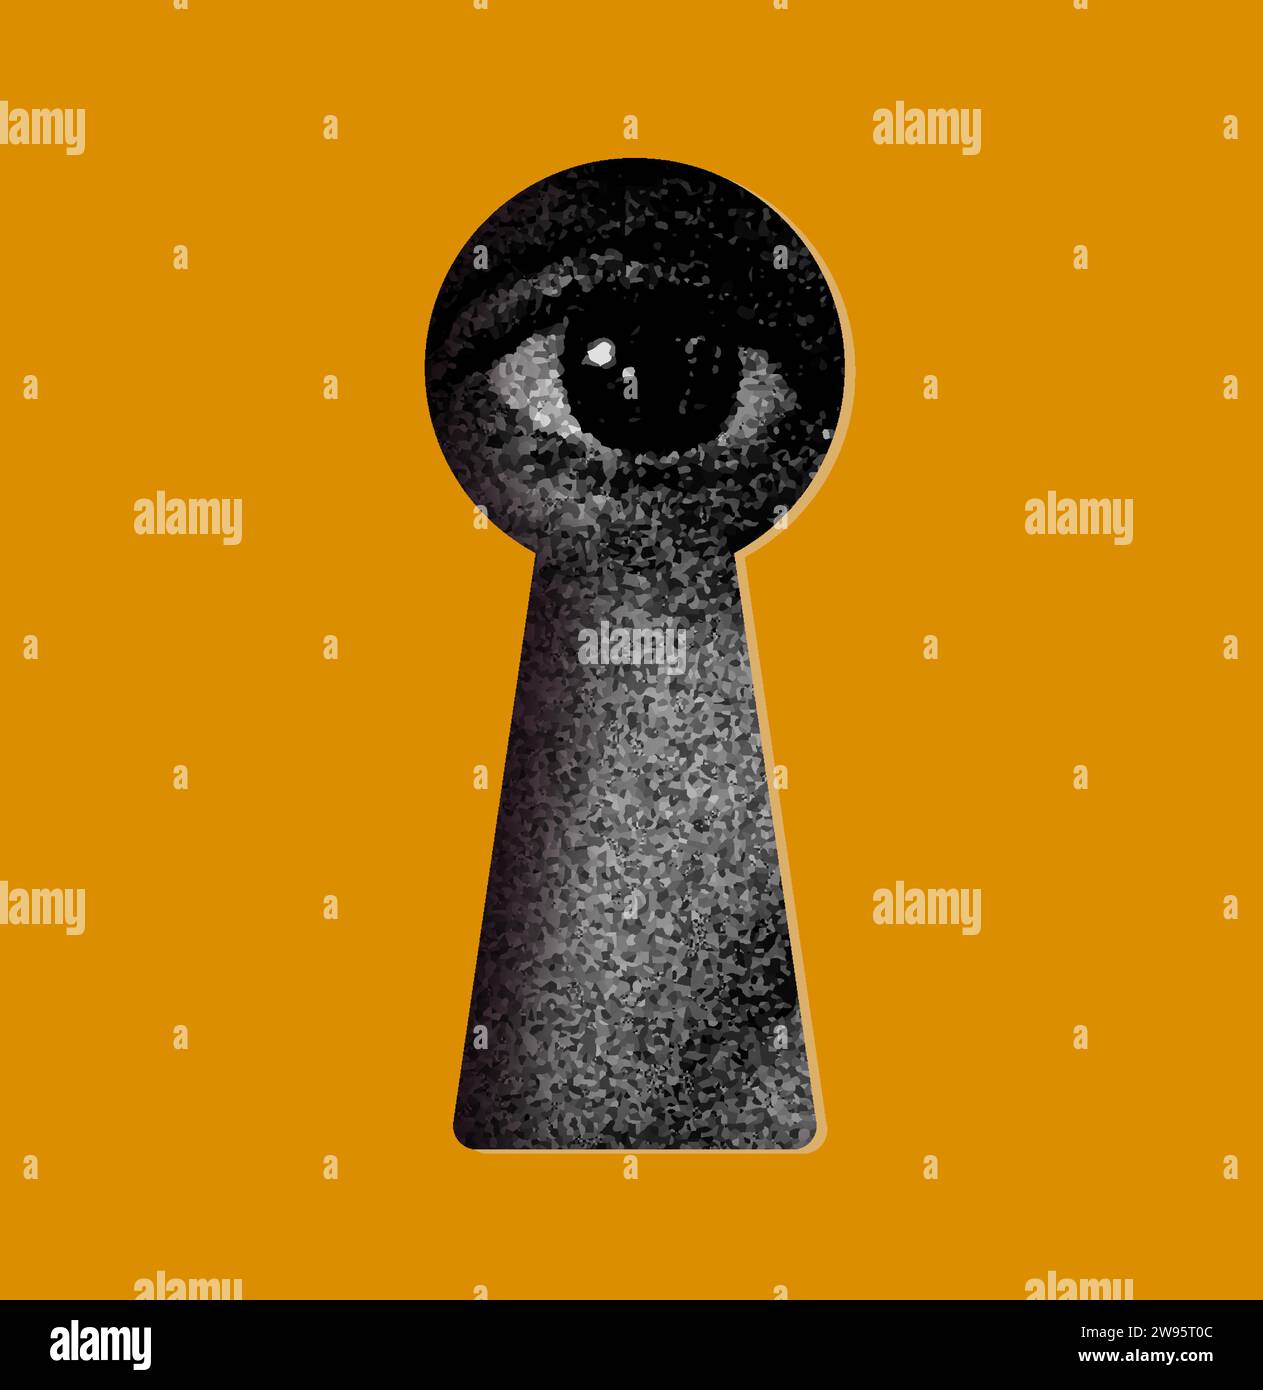 90s trendy art collage, human eye looking through keyhole. Design concept for curiosity, stalker, security, voyeurism and surveillance Stock Vector